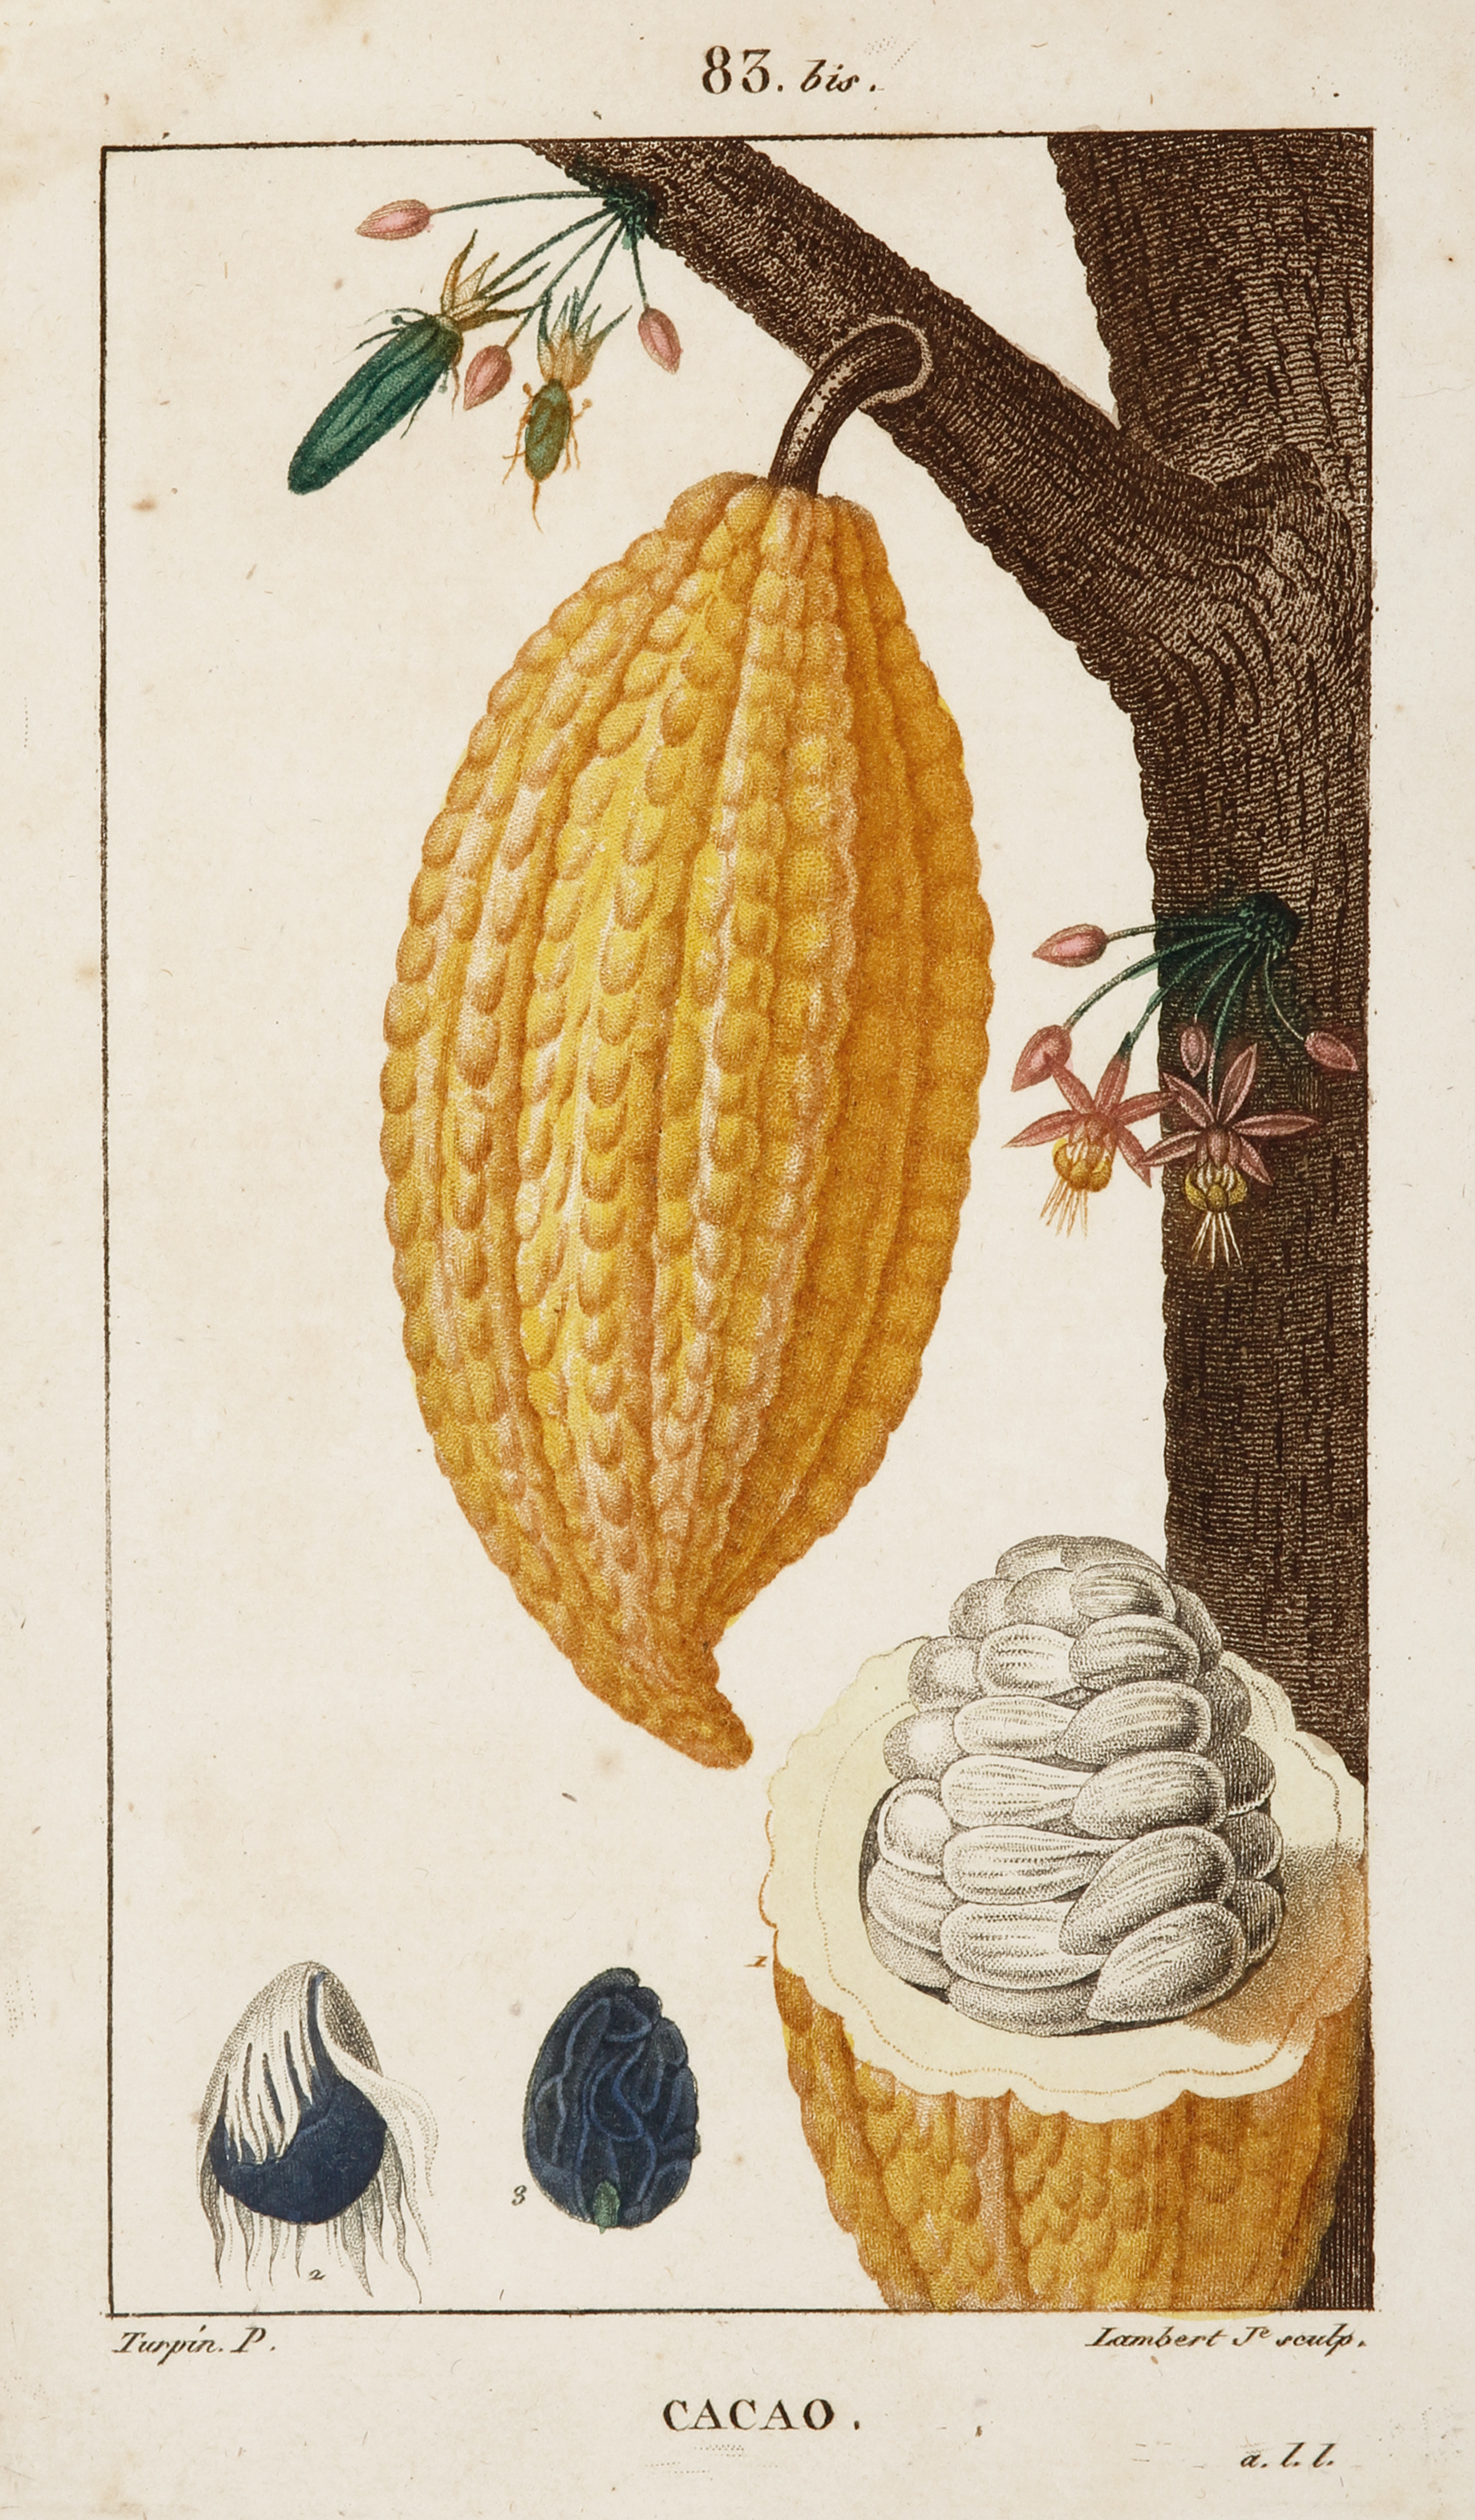 Cacao. - Antique Print from 1816